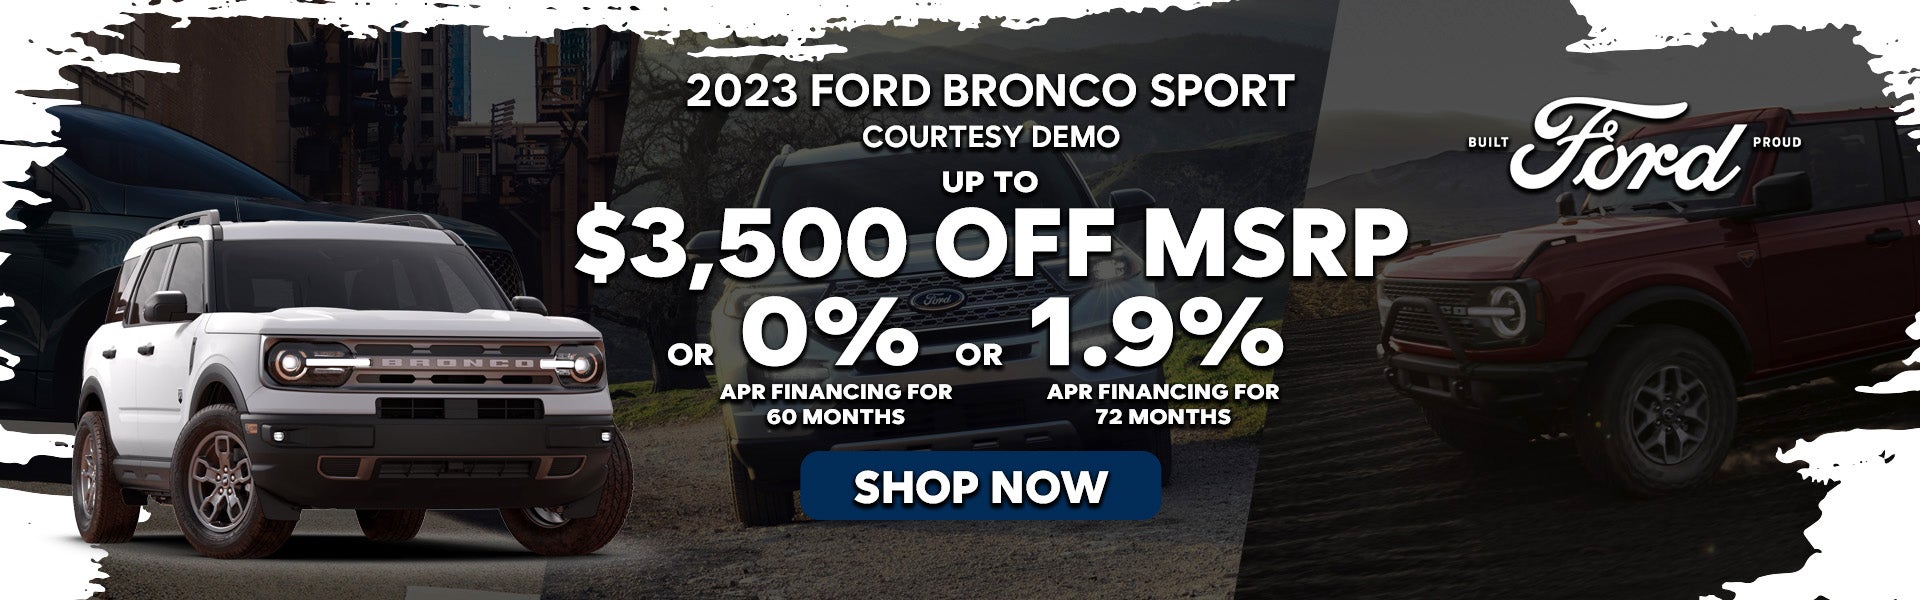 2023 Ford Bronco Sport Courtesy Vehicle Special Offer